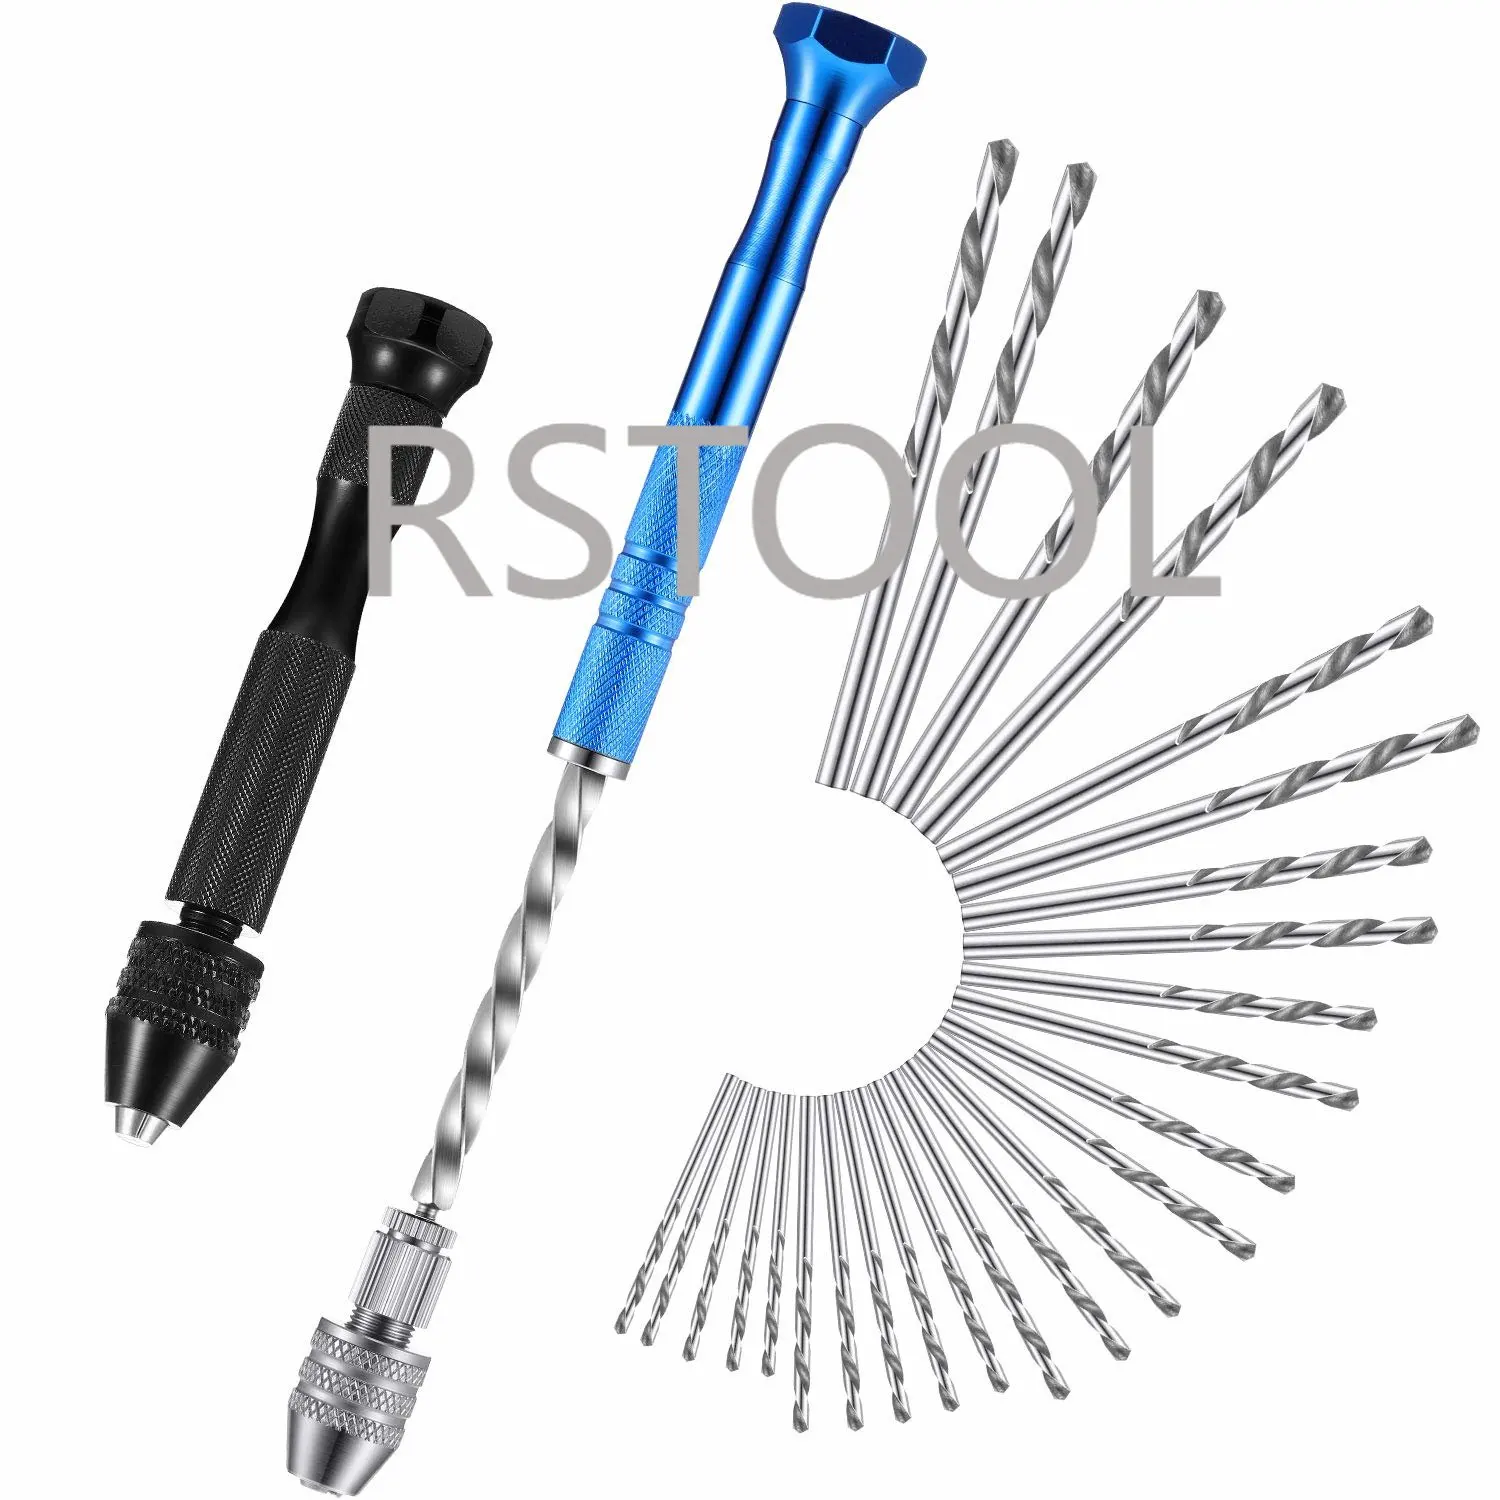 Pin Vise Hand Drill for Jewelry Making - Manual Craft Drill Mini Twist Drill  Bits Set, Small Hand Drill for Resin 